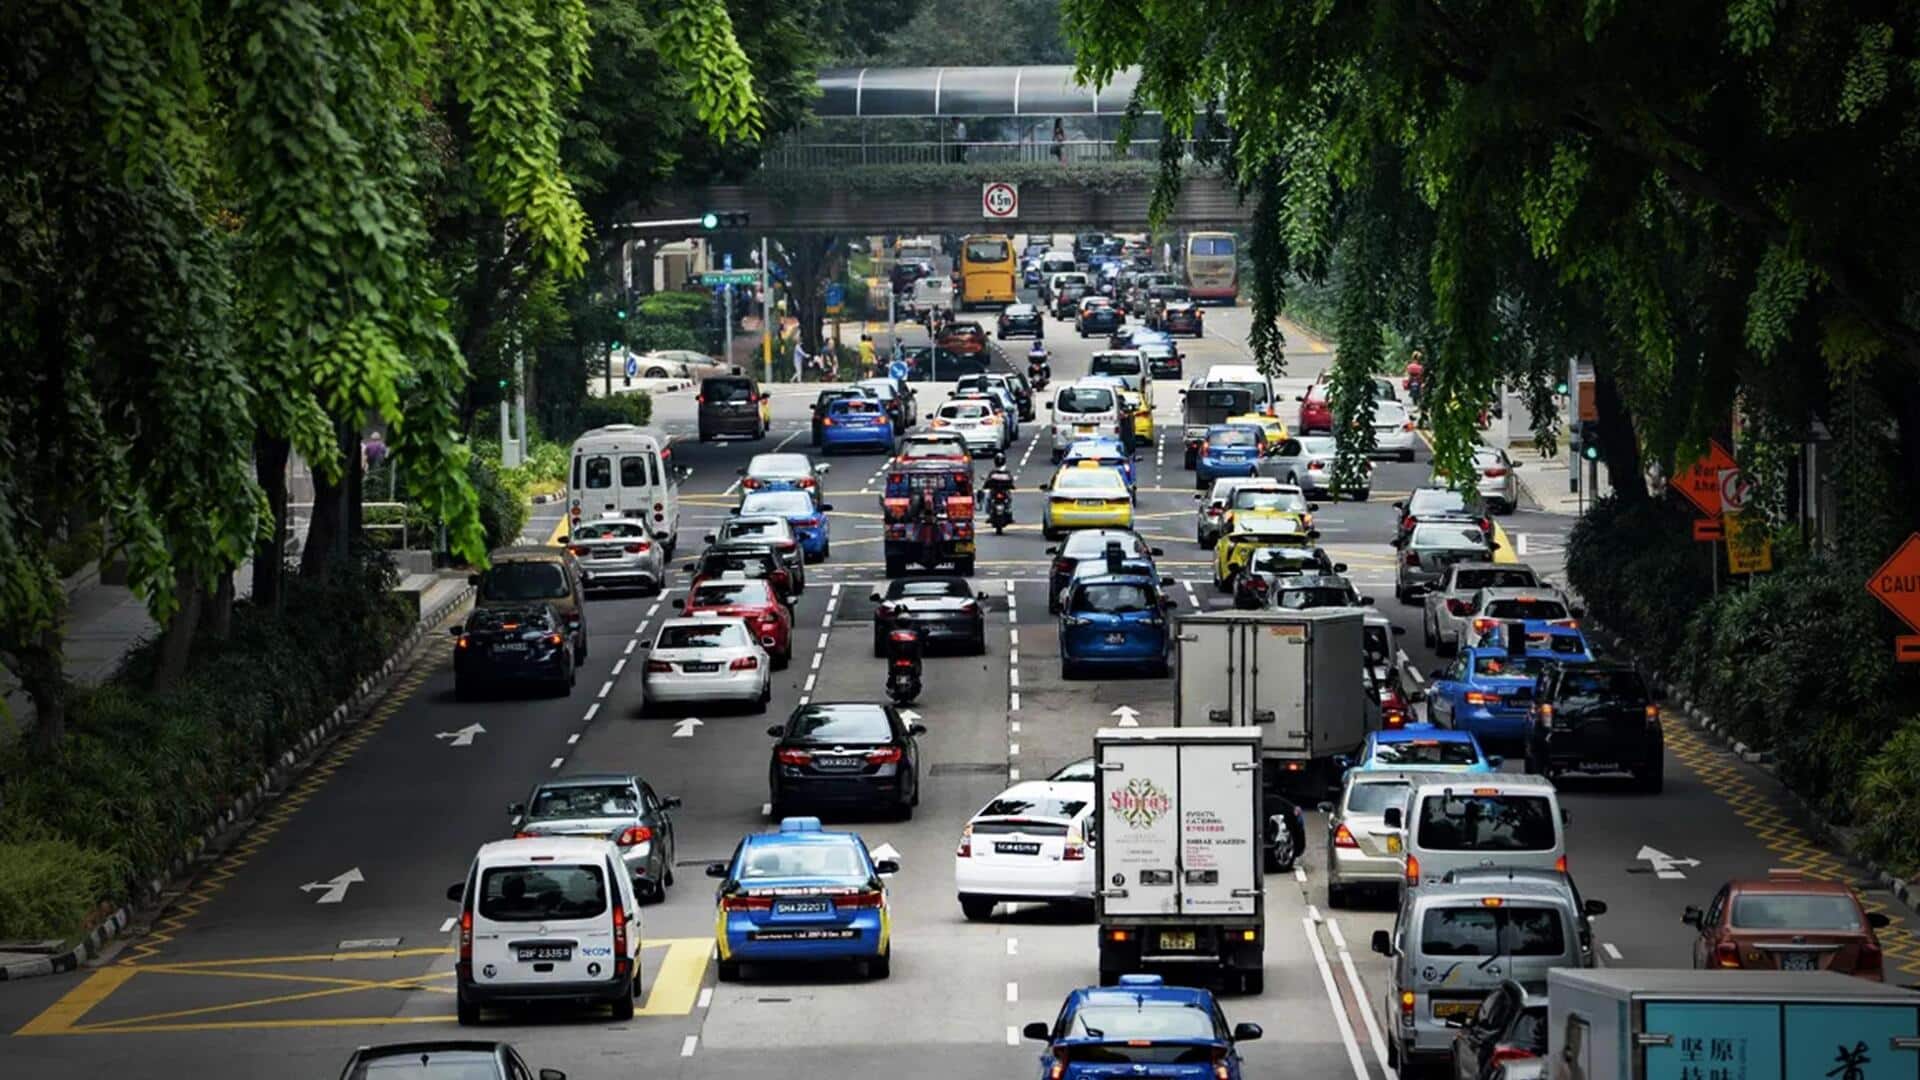 Singapore: Car ownership certificate costs up to Rs. 88 lakh